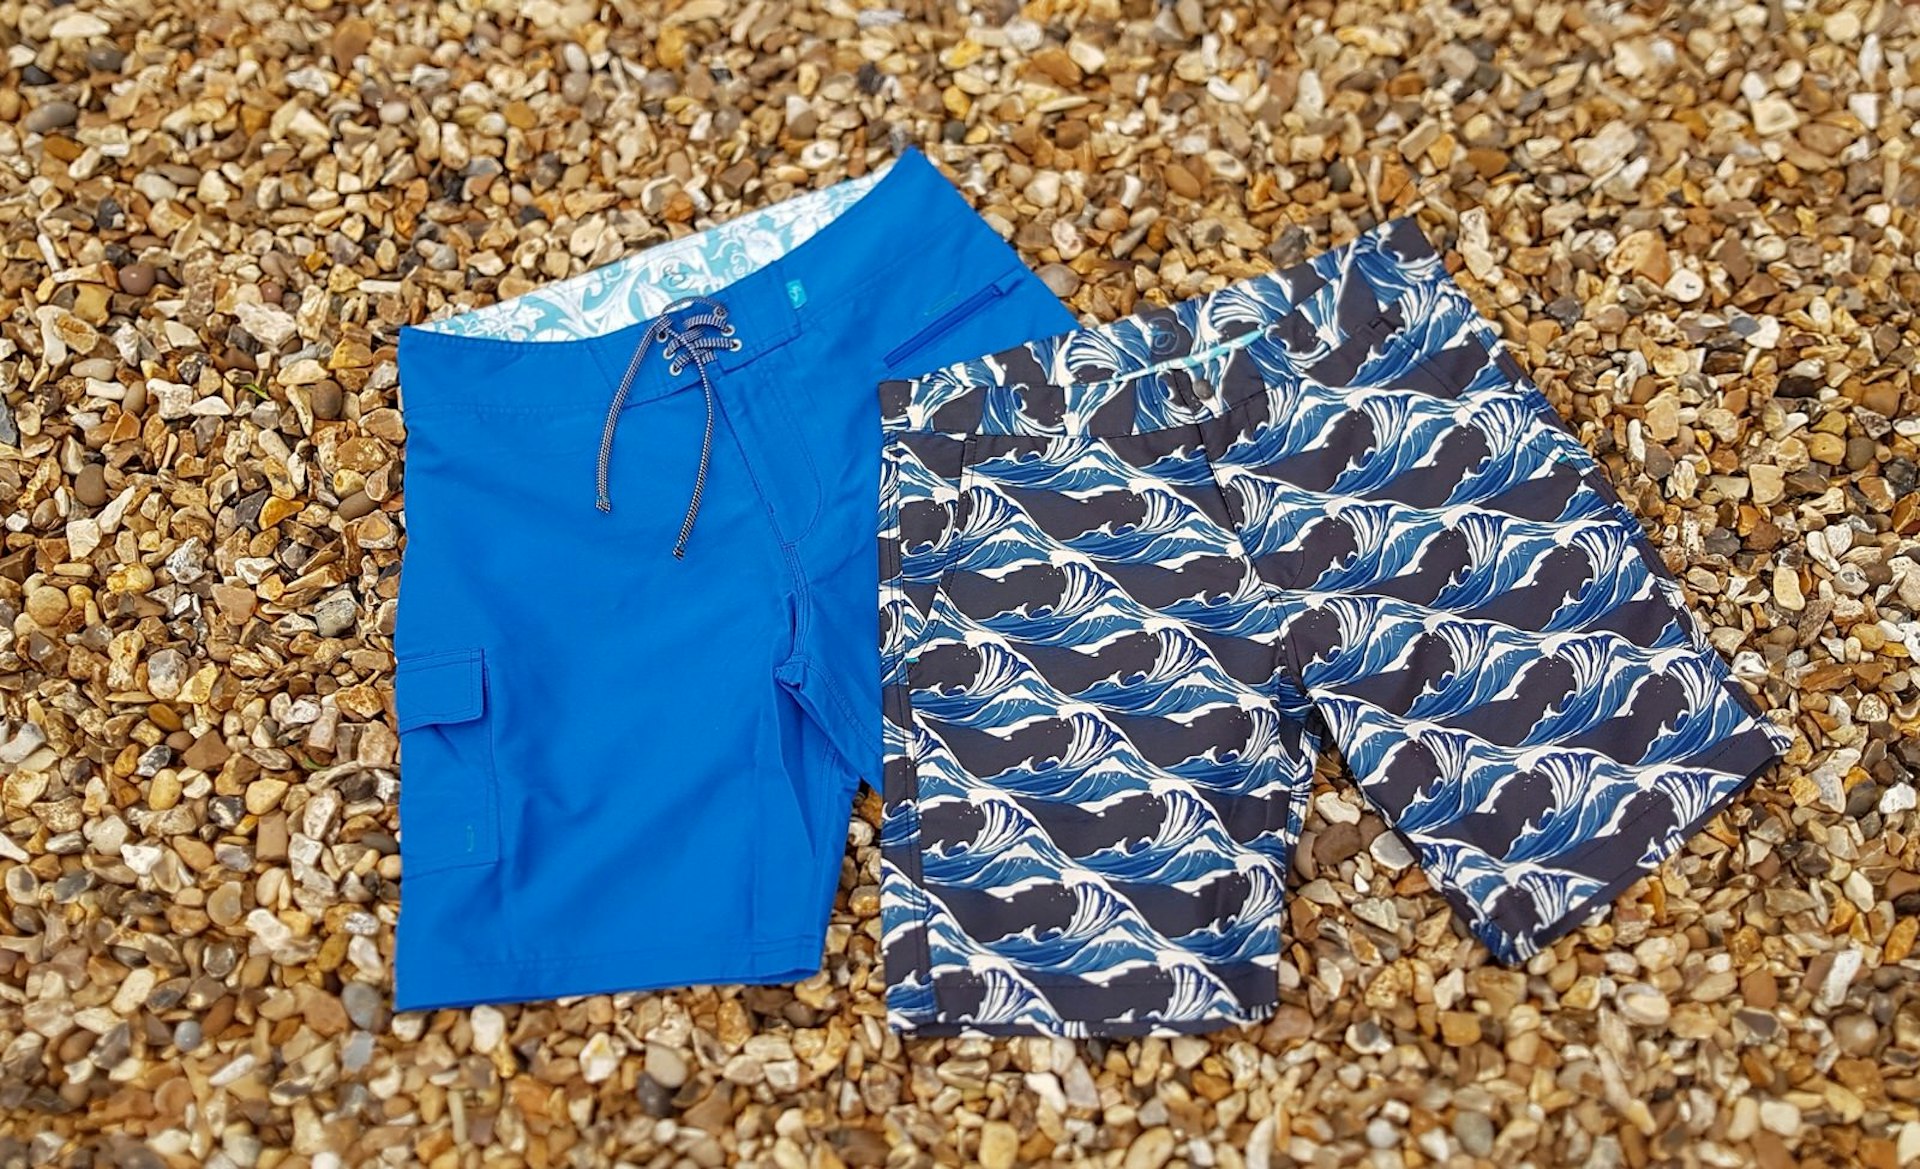 Two pairs of Riz Board Shorts, shown in plain blue and a wave pattern